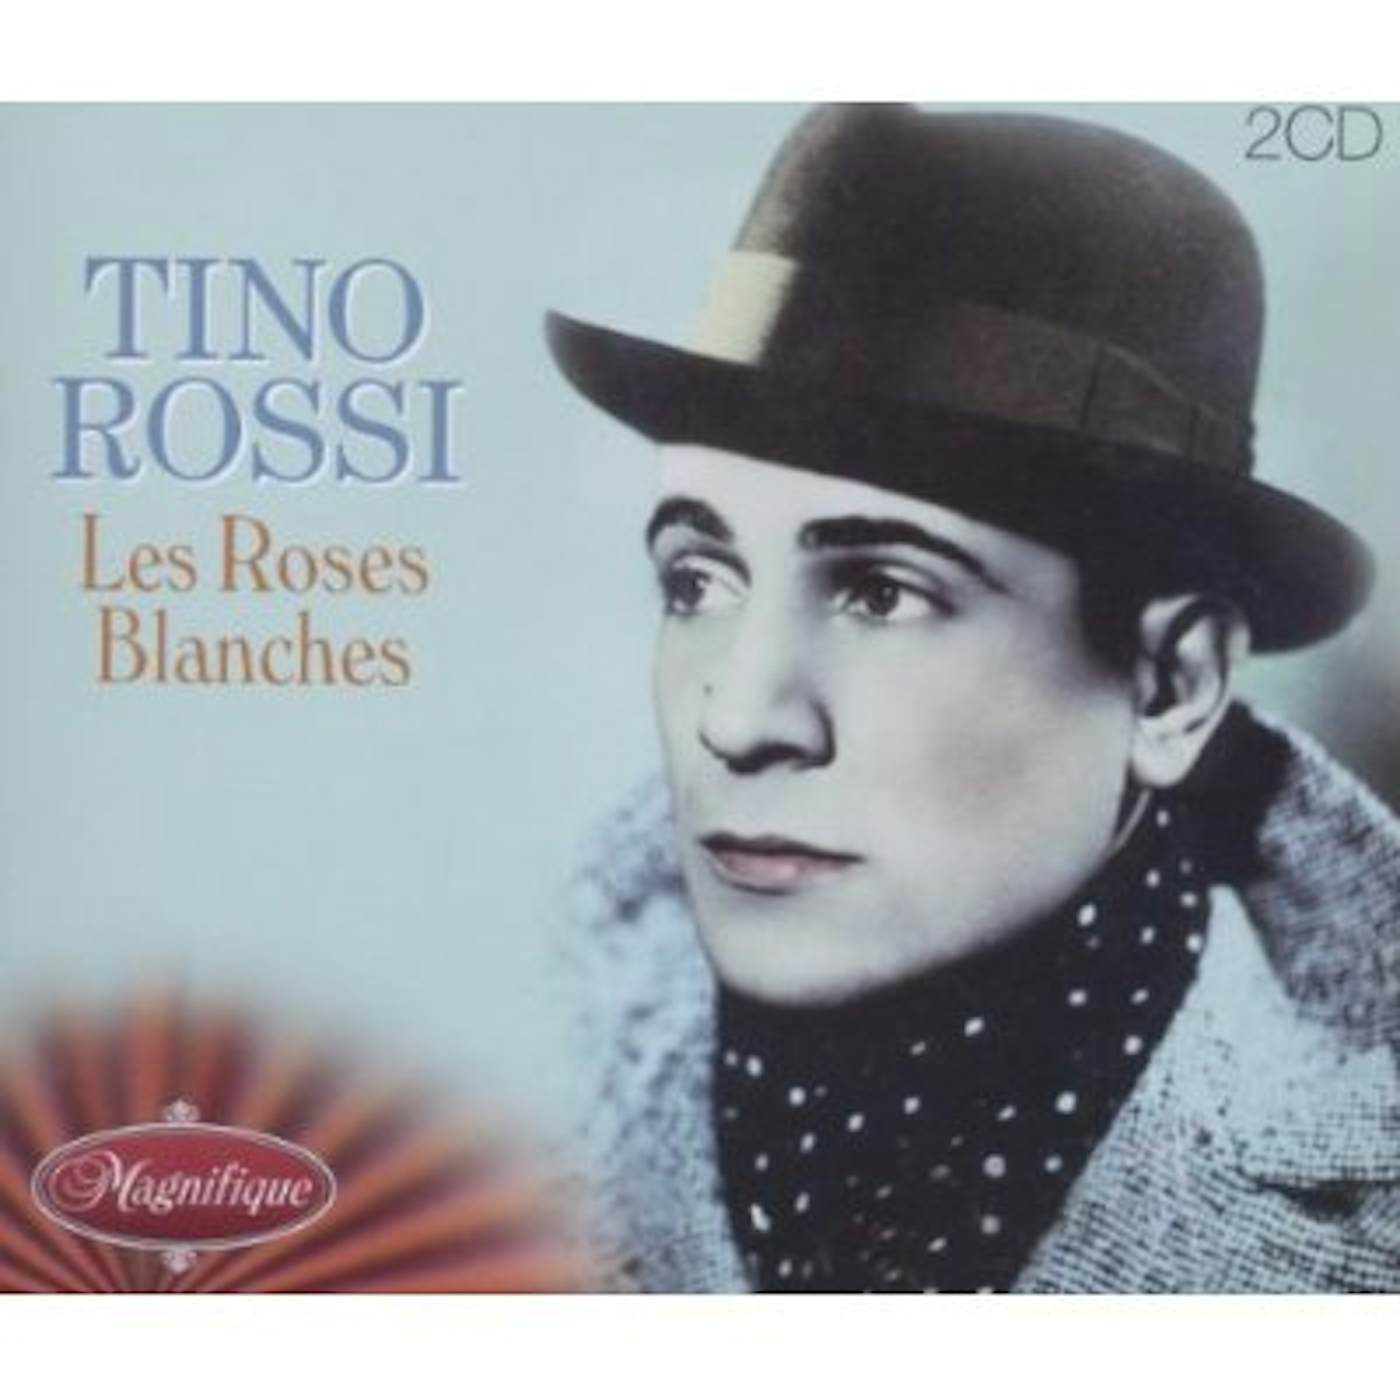 Tino Rossi LES ROSES BLANCHES CD